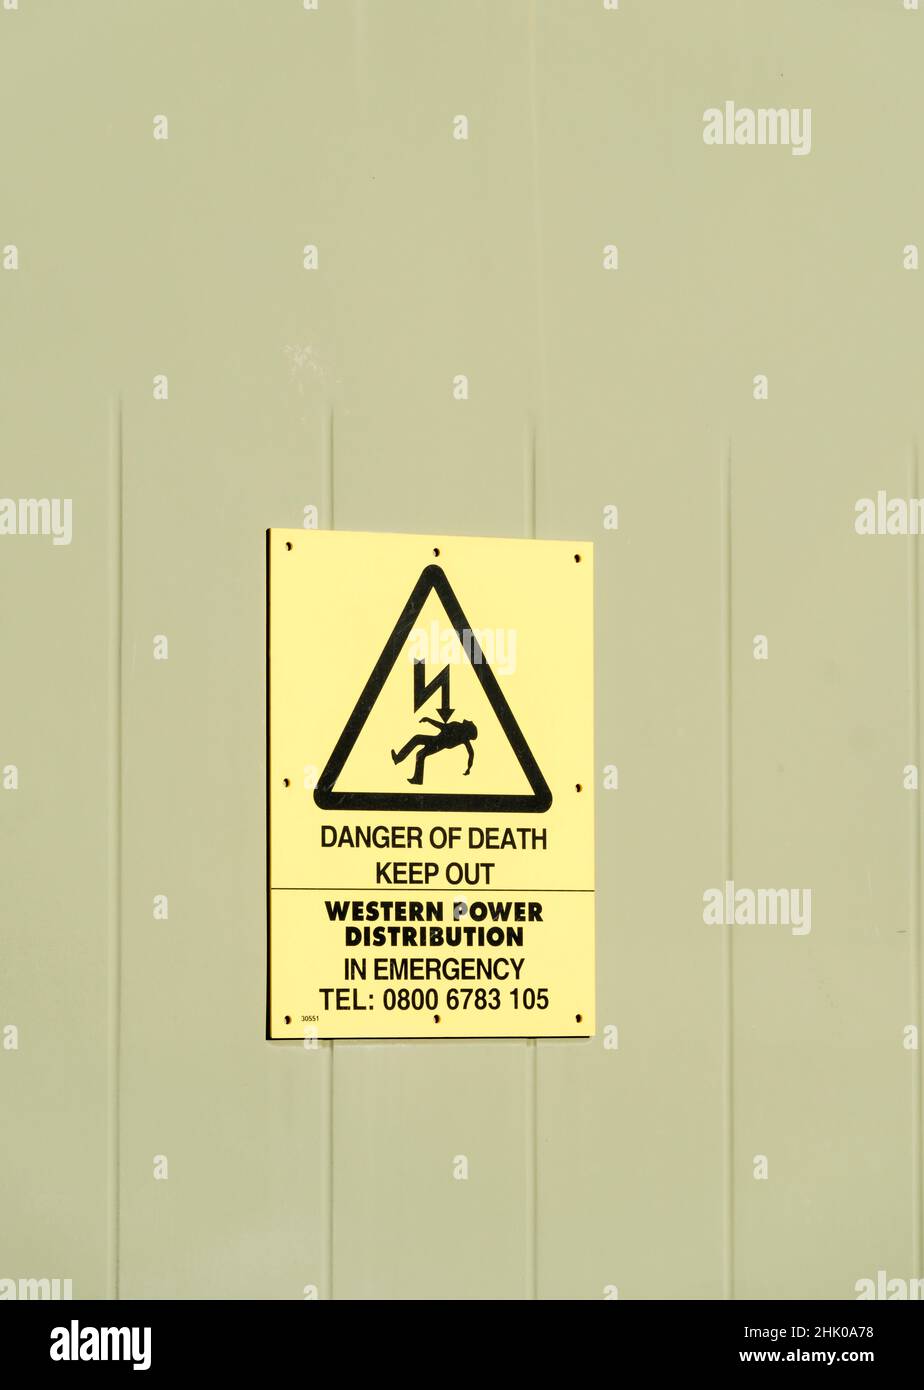 Western power distribution warning sign of death from electric shock Stock Photo